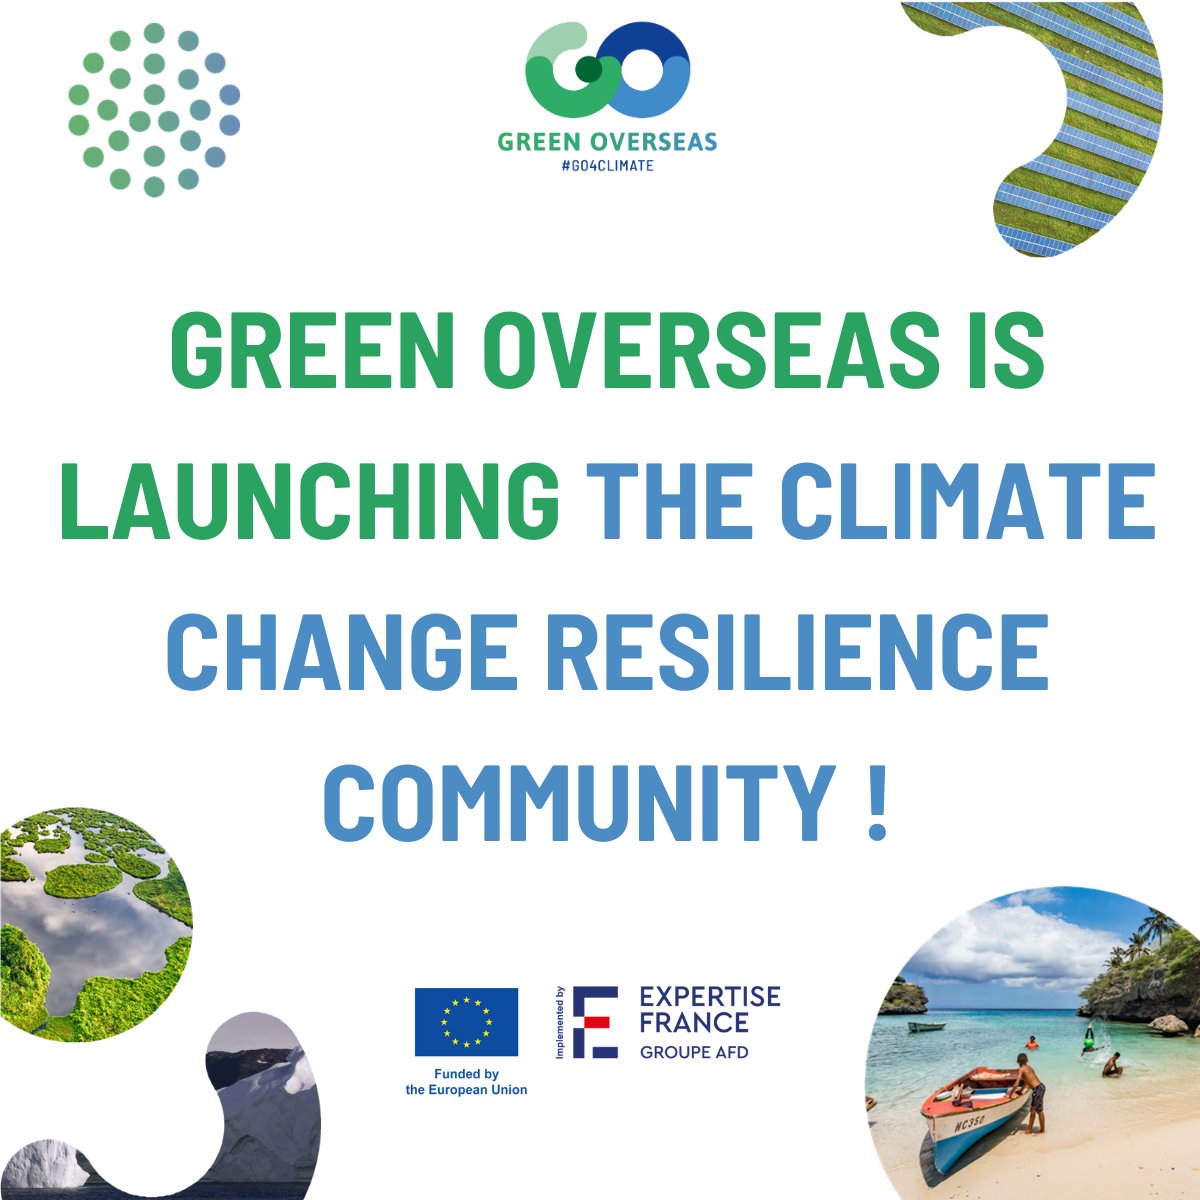 🌍 Exciting news

The Green Overseas Climate Change Resilience Community launches its online training series today

Join us from April 15th to 26th, to boost climate resilience in Overseas Countries and Territories

More info 👇
linkedin.com/posts/greenove…

#GO4Climate #ClimateAction